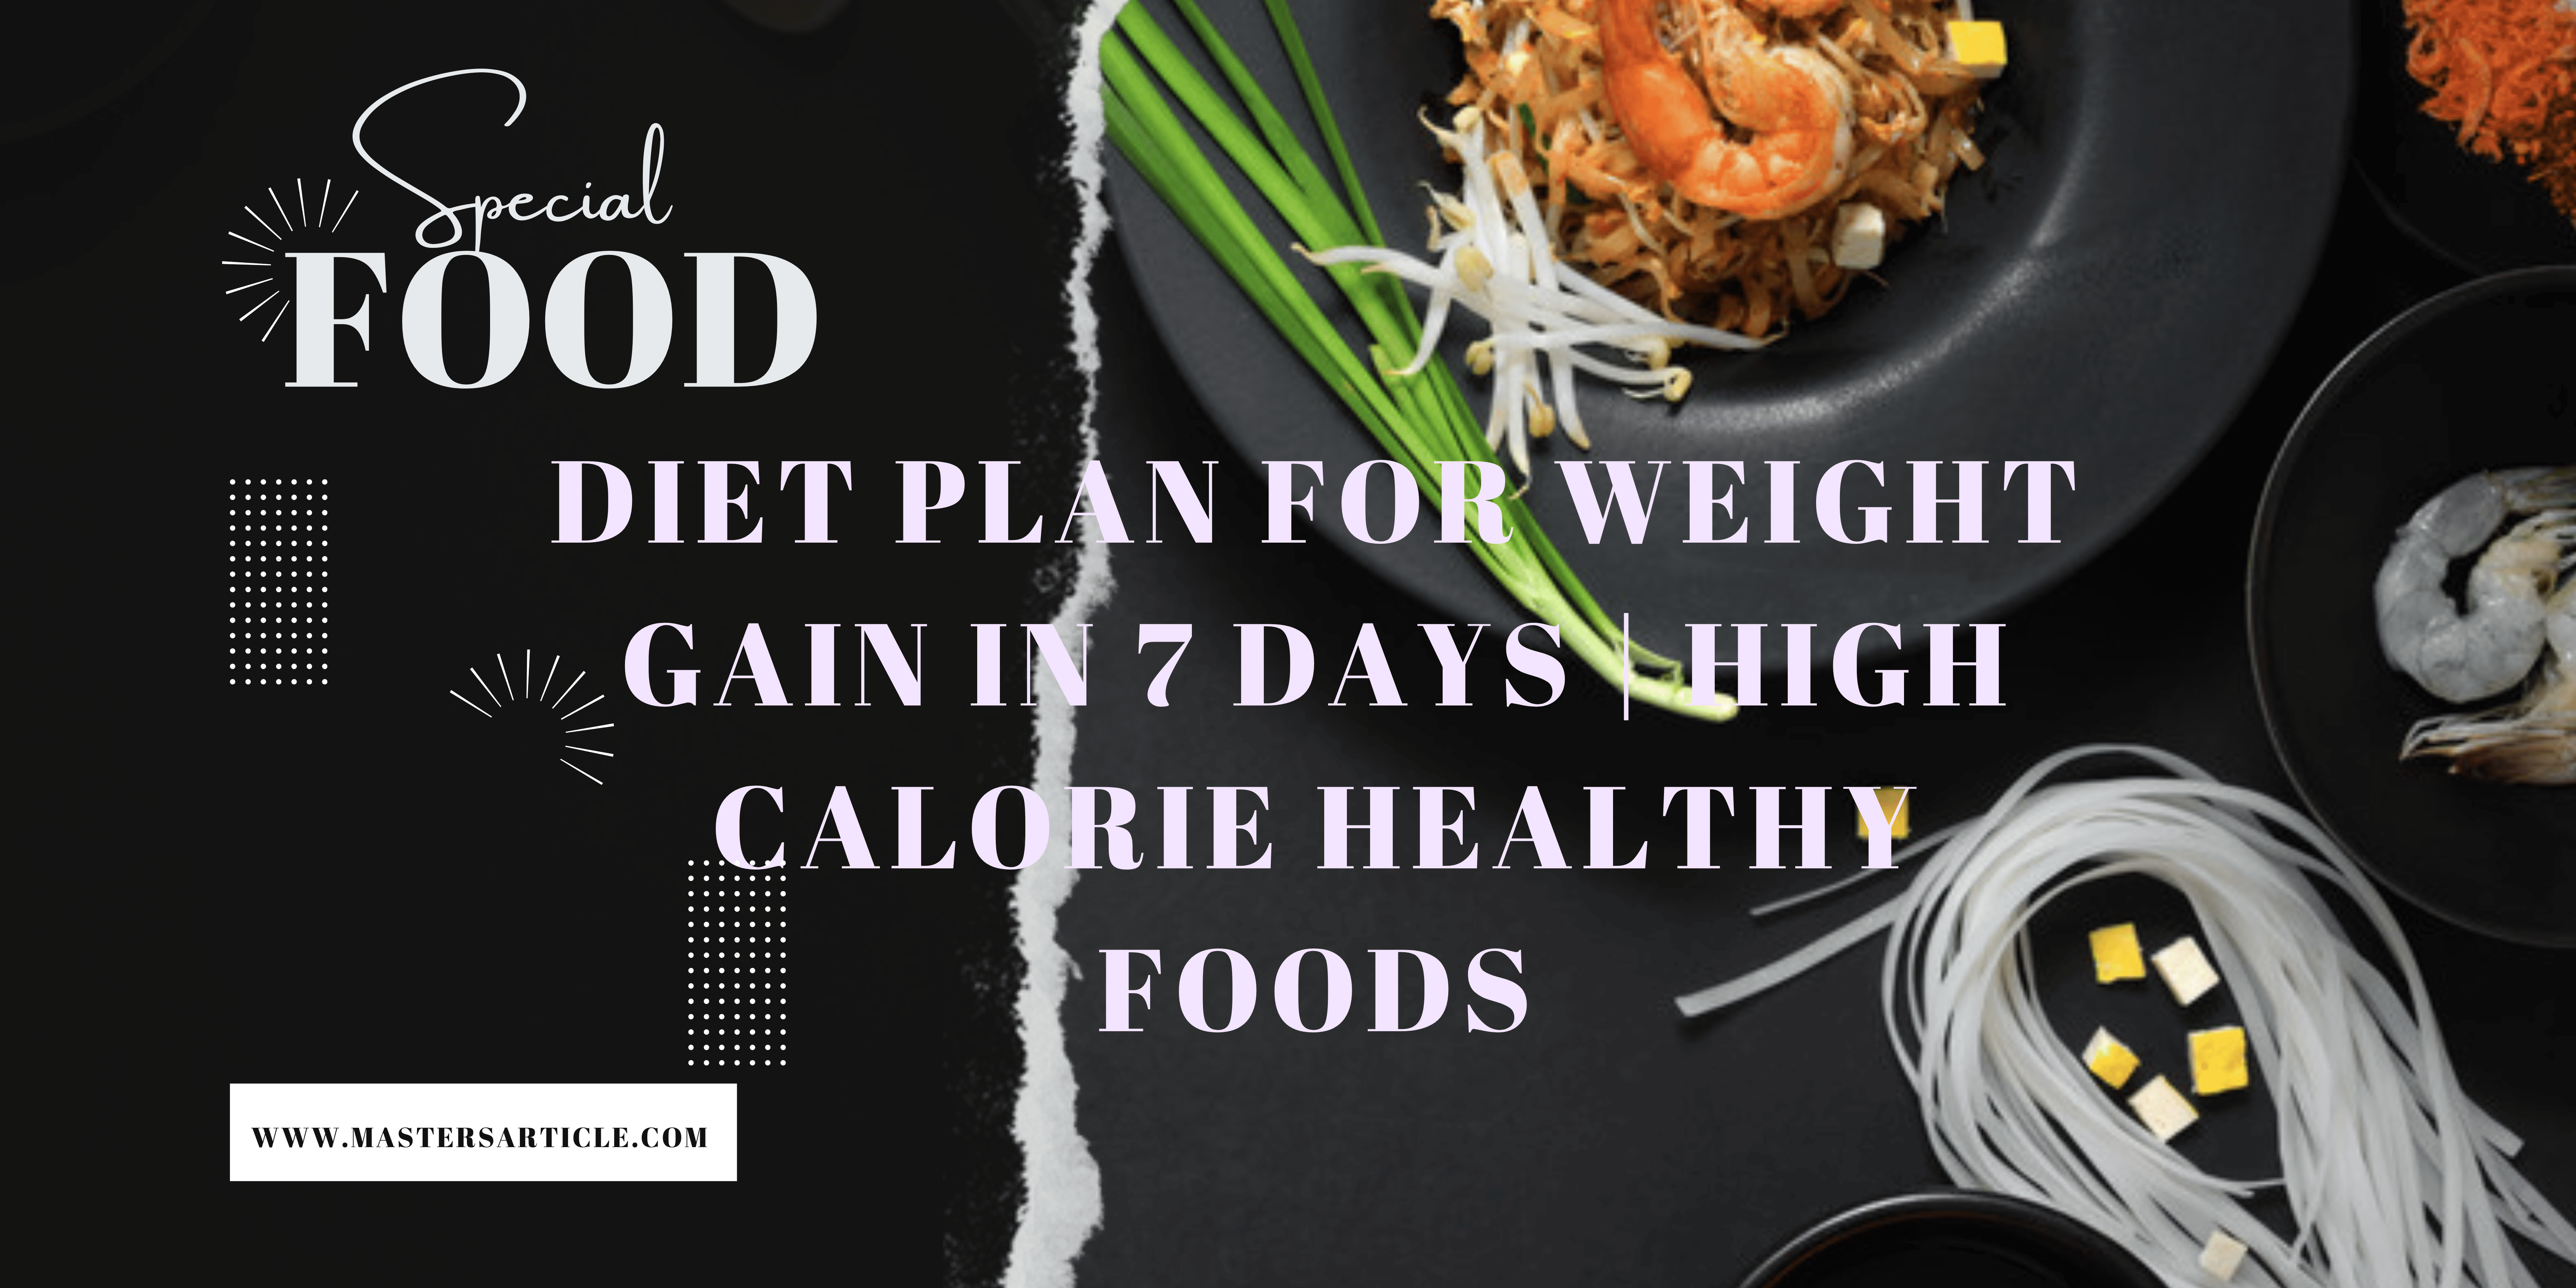 Diet Plan For Weight Gain in 7 Days | High Calorie Healthy Foods